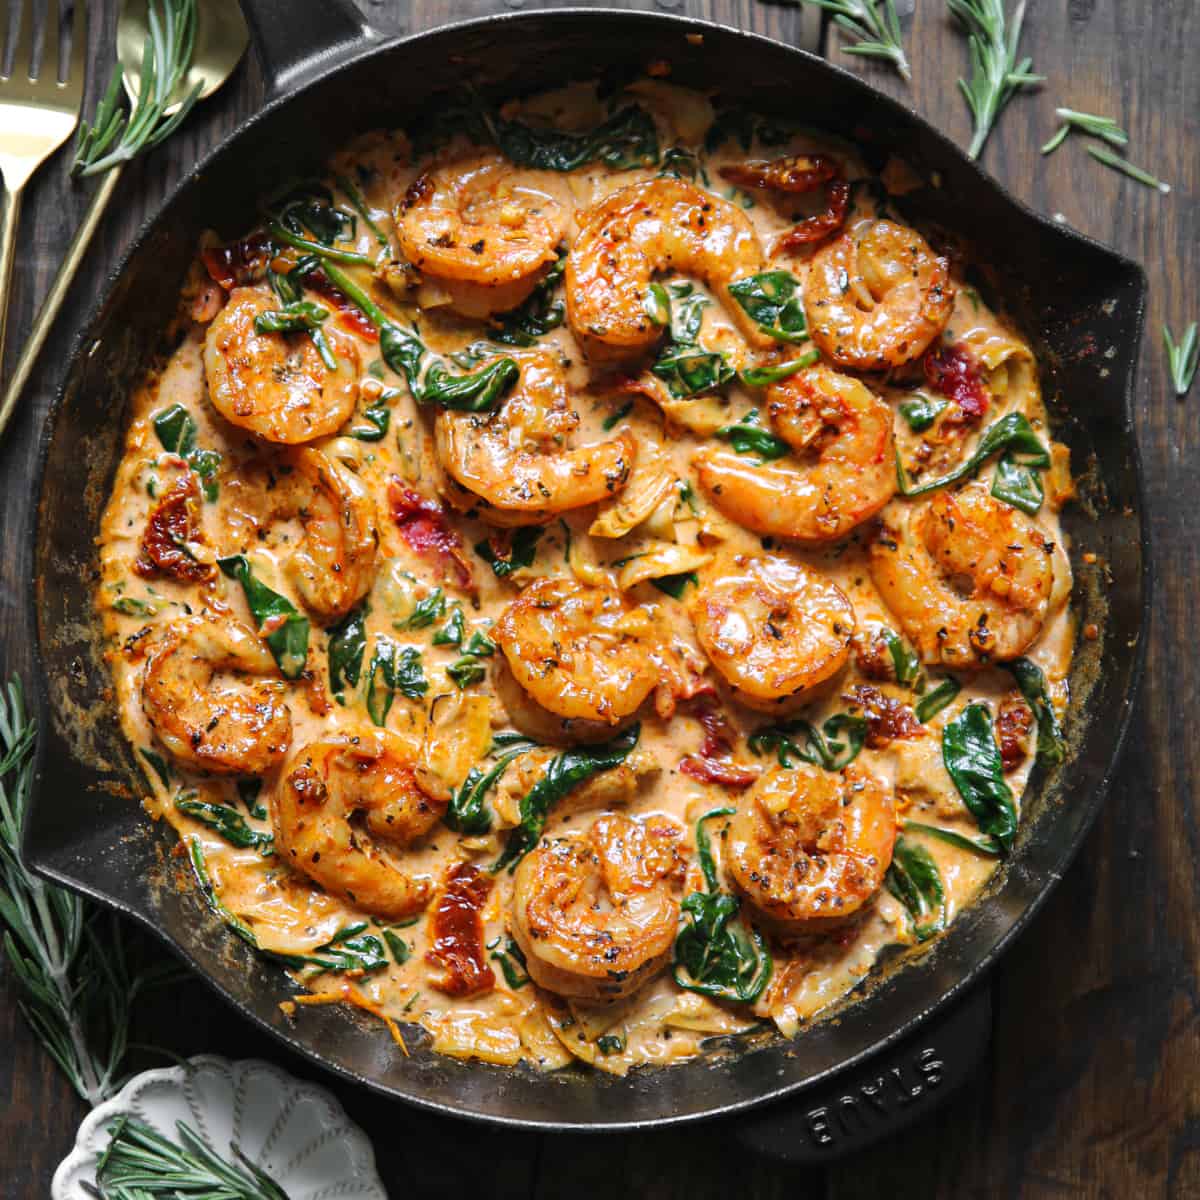 Creamy Tuscan Shrimp with Sun-Dried Tomatoes, Spinach, and Artichokes - in a cast iron skillet.